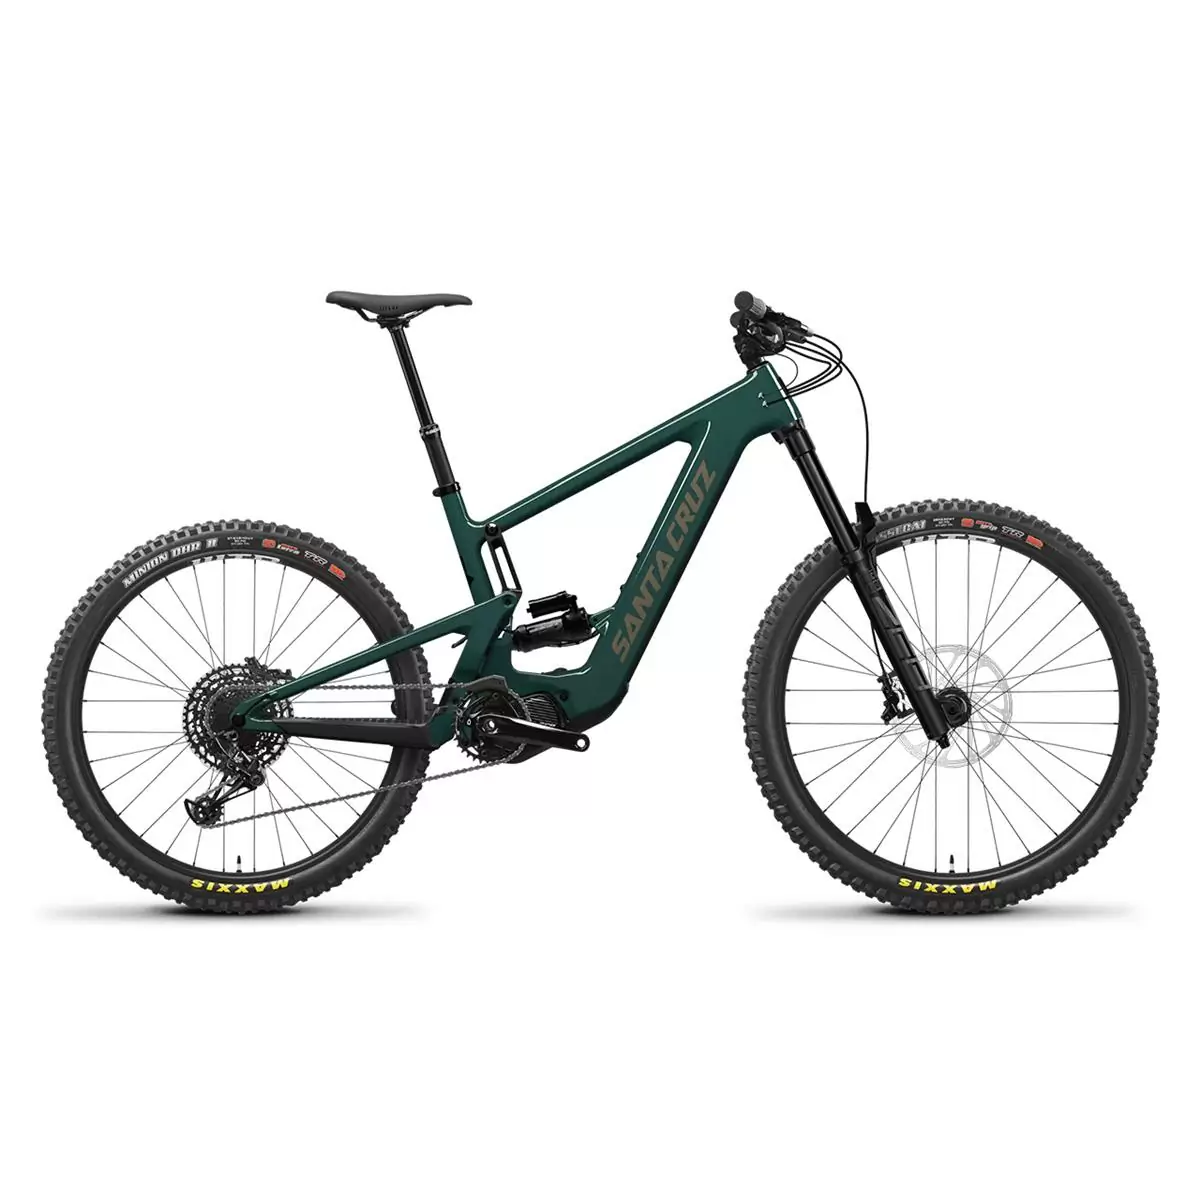 Bullit 3 CC R MX 29/27.5'' 170mm 12s 630Wh Shimano EP8 Green 2023 Size M - image